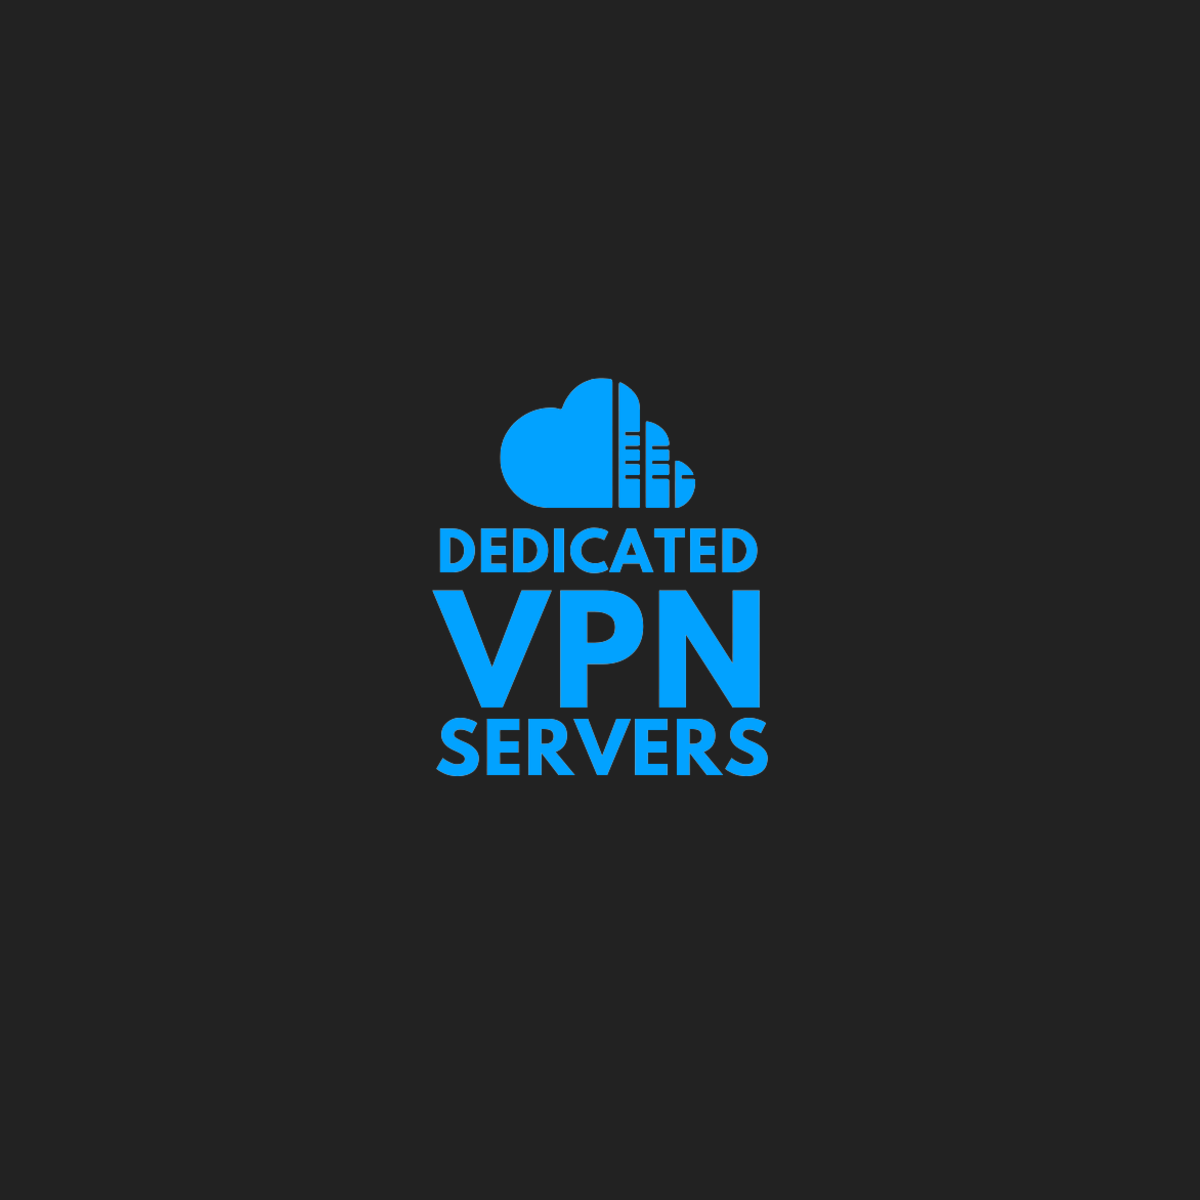 introducing our new service - dedicated vpn servers